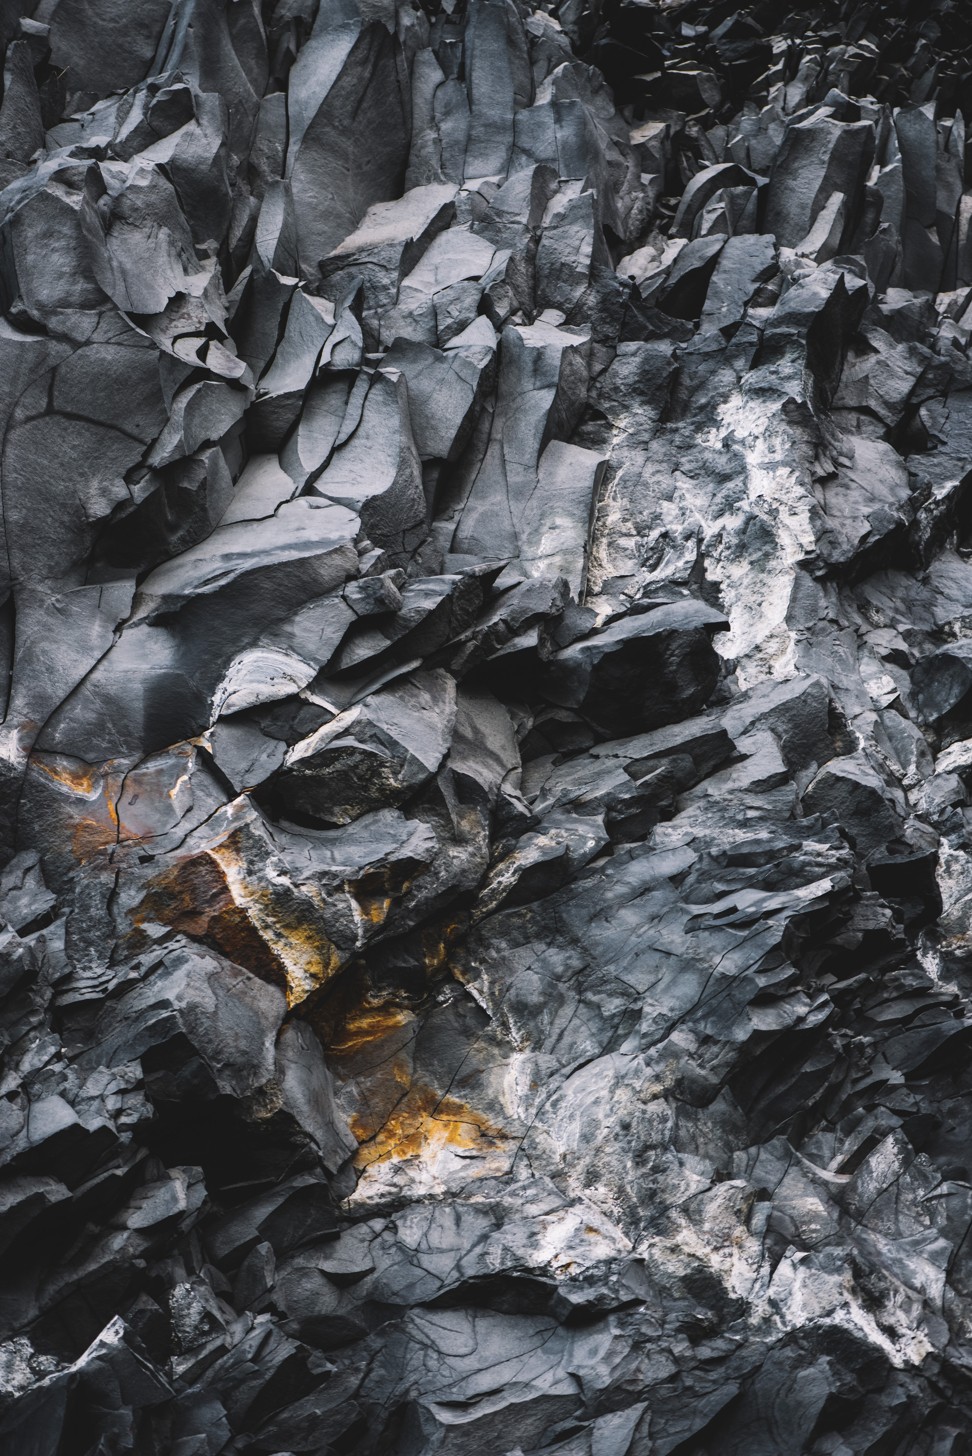 Volcanic rocks with a beautiful basalt texture, Iceland is dotted with 125-plus active or dormant volcanoes.